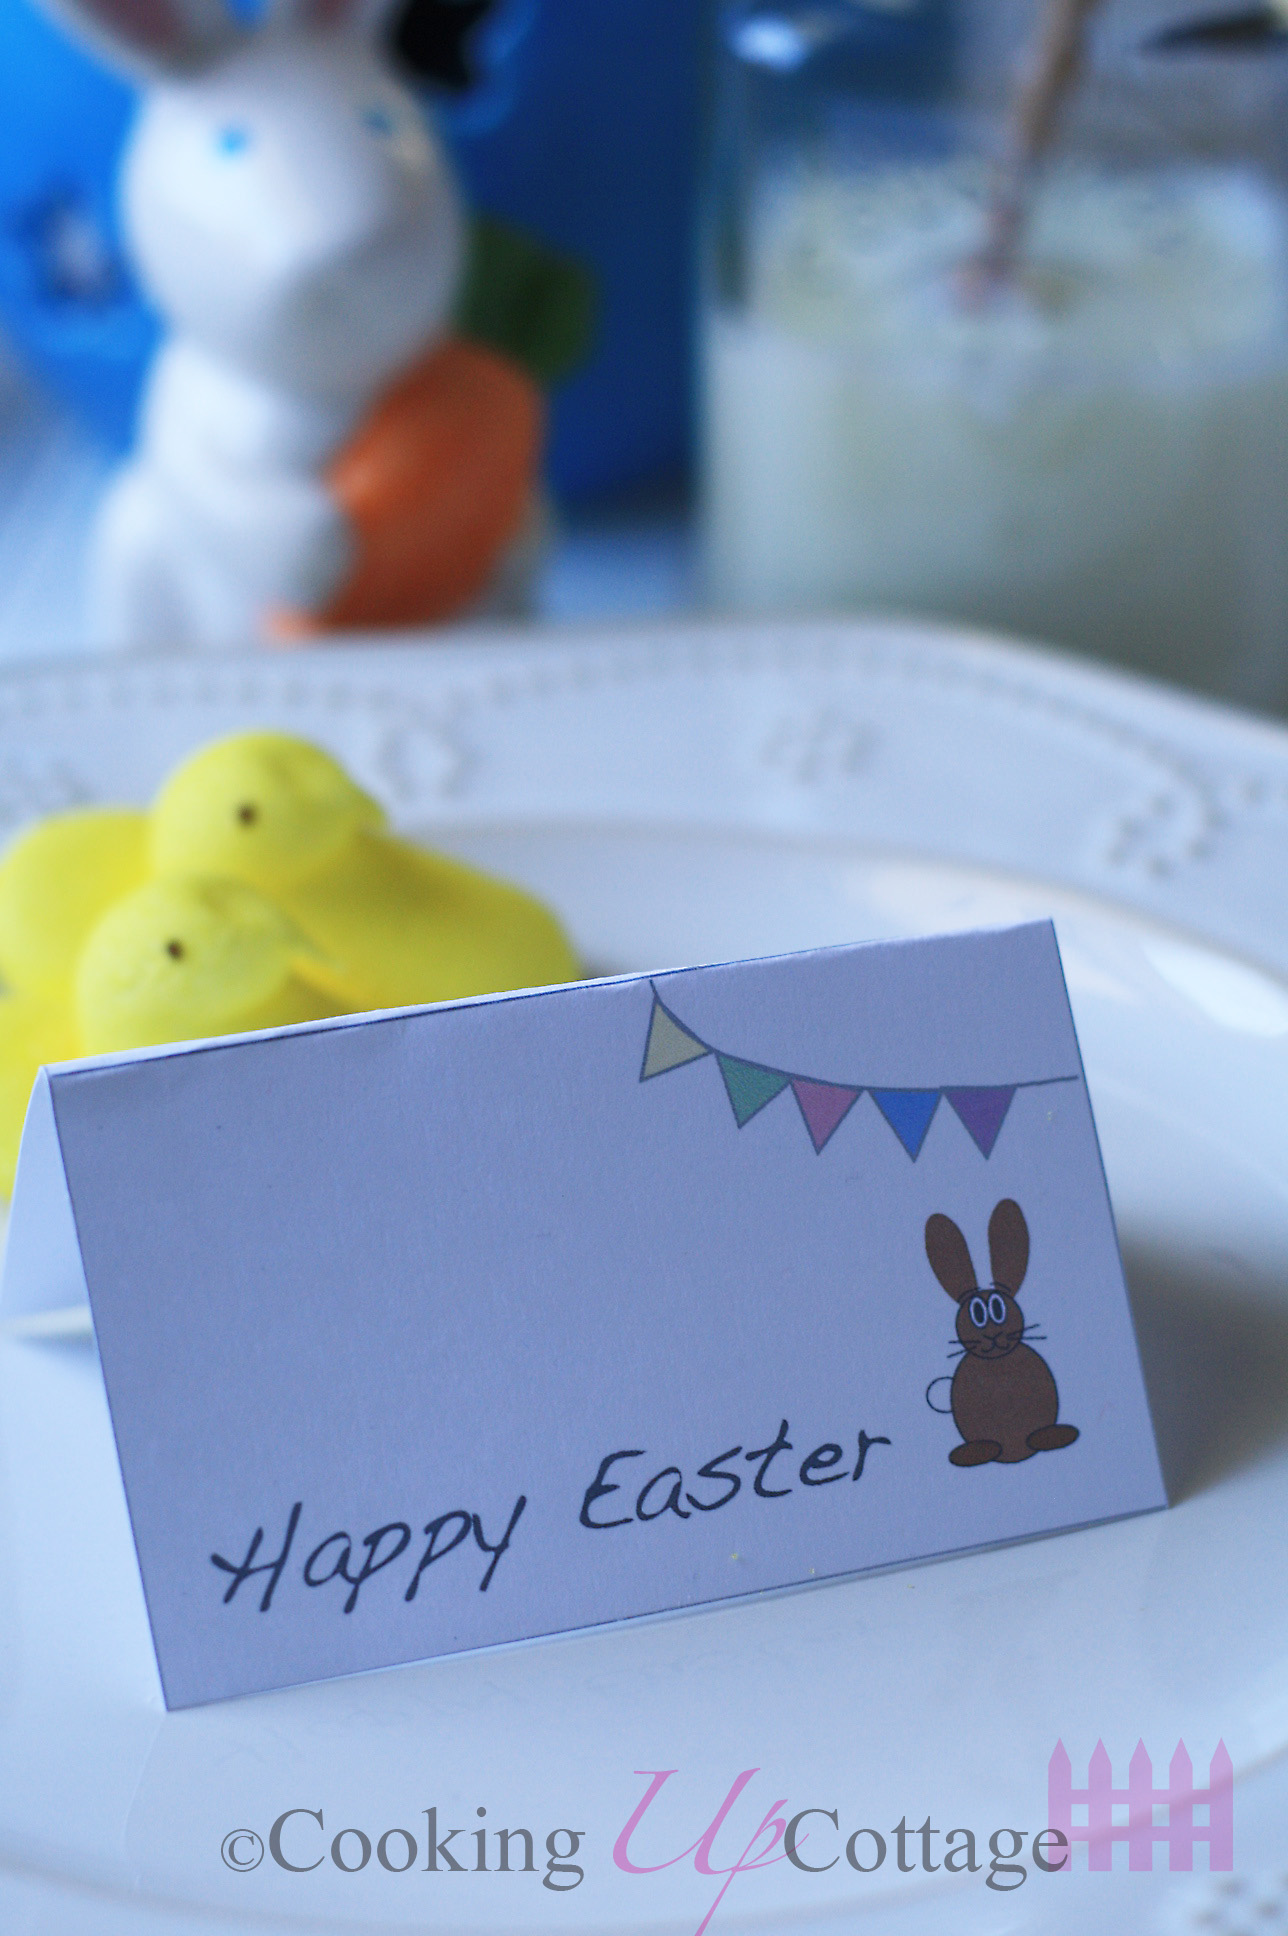 https://www.cookingupcottage.com/wp-content/uploads/2015/04/Easter-Place-Card-4.jpg